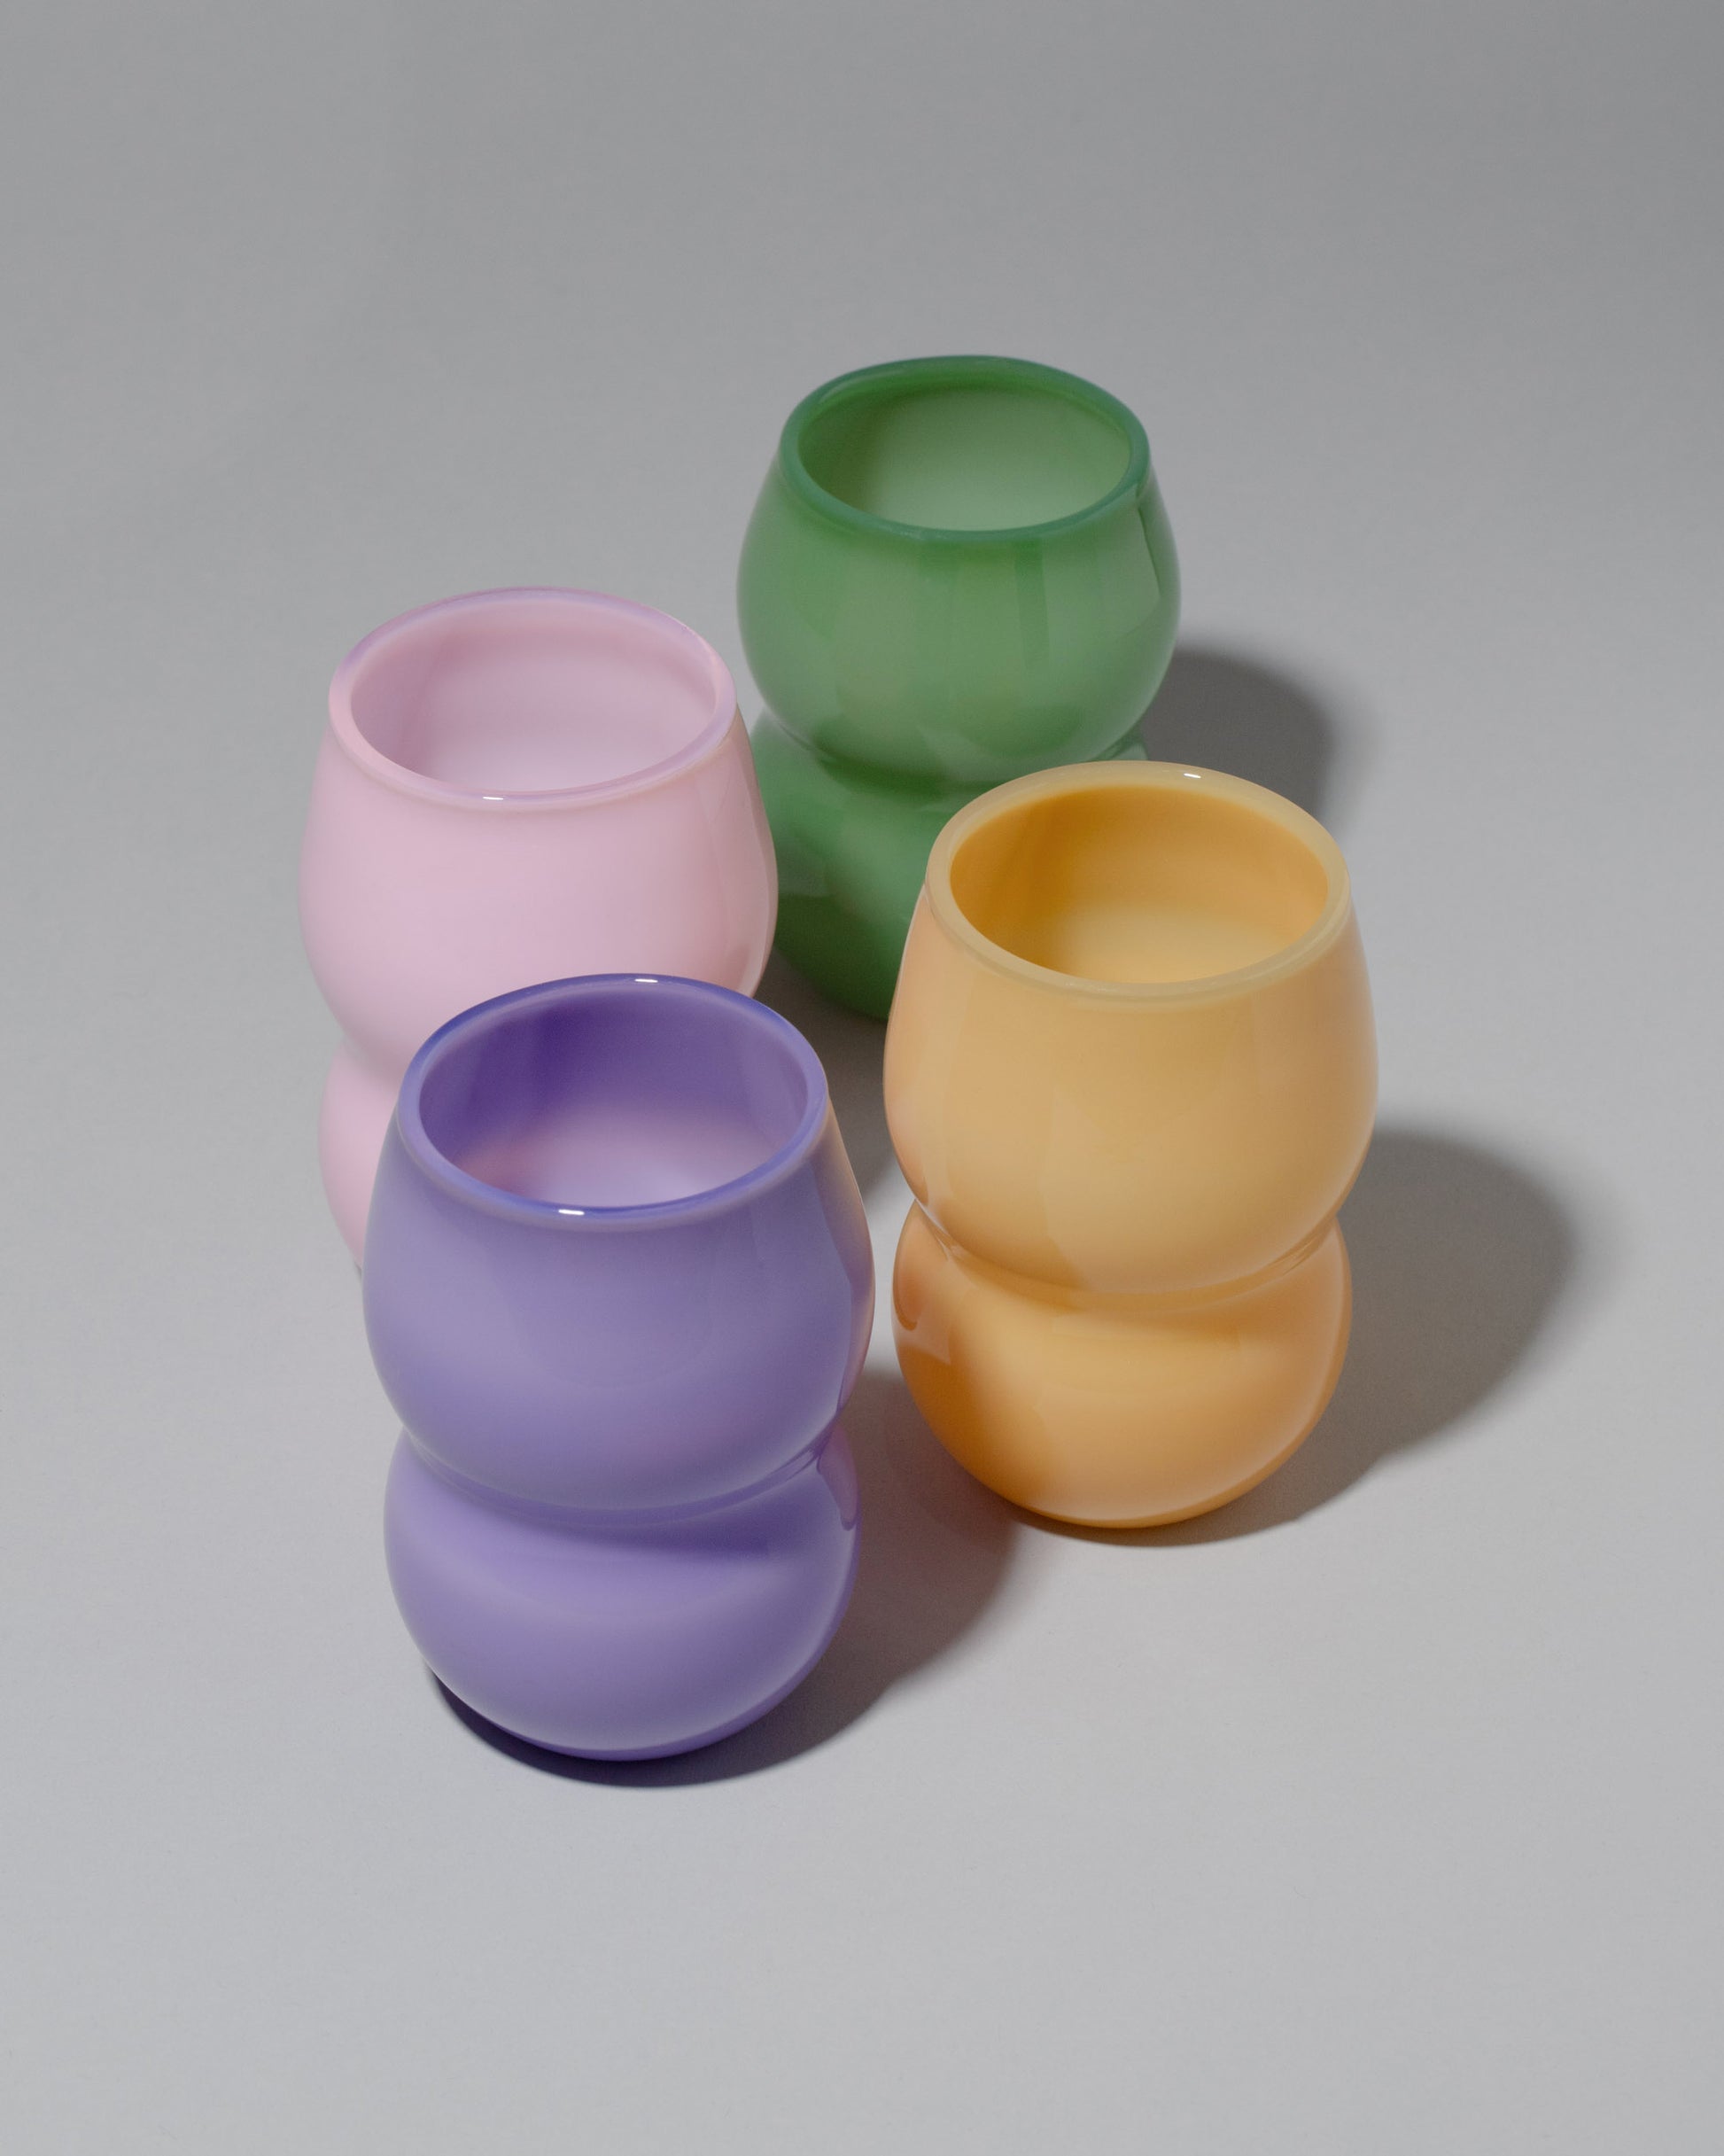 Group of Ornamental by Lameice Mint, Violet, Topaz and Pink Opaque Dreamlike Cups on light color background.